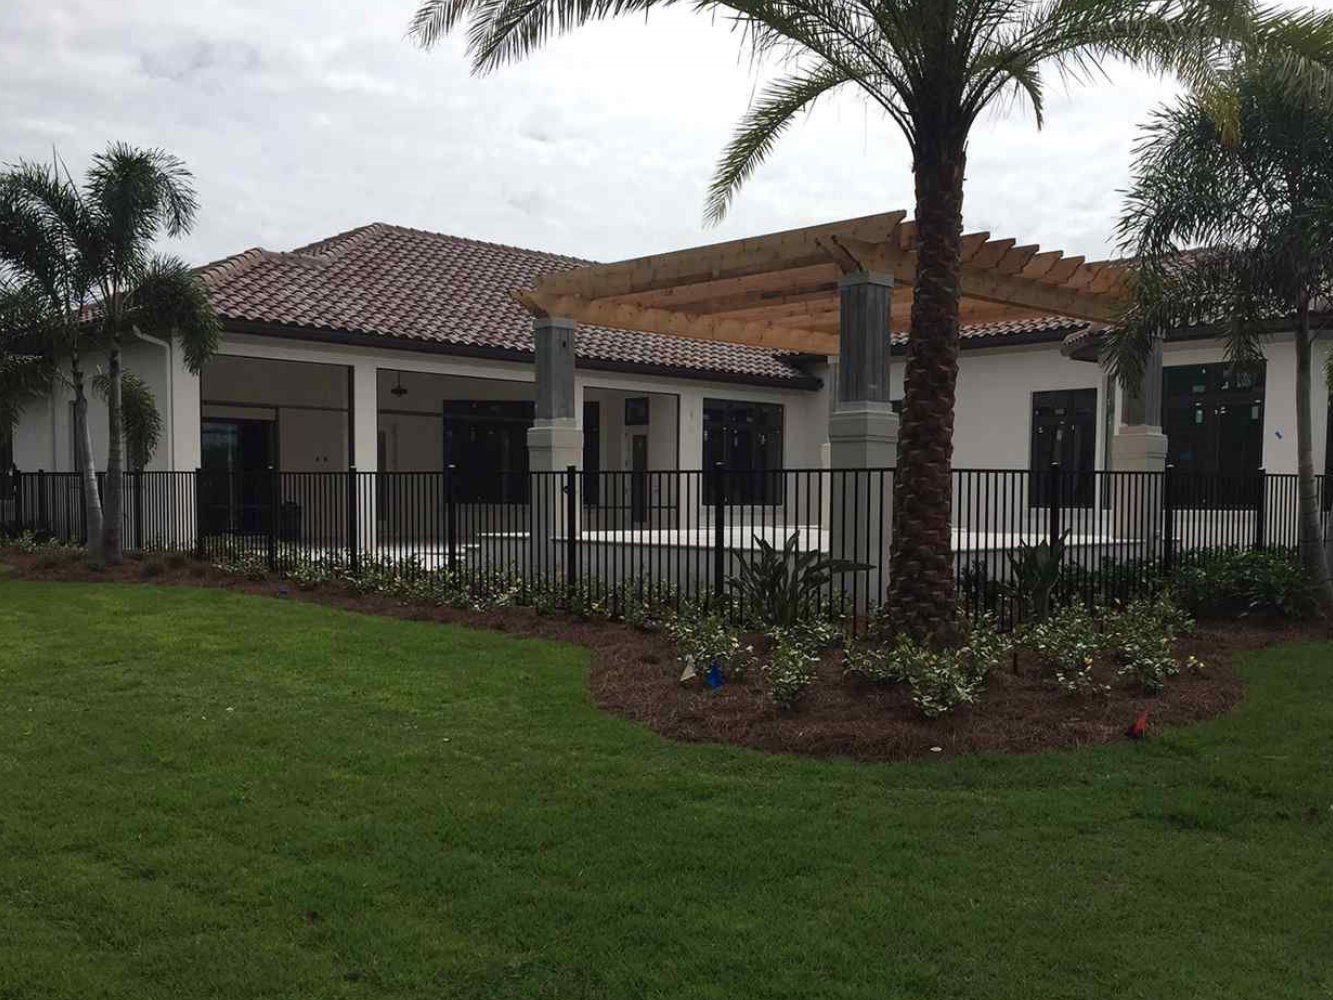 Venice Florida residential and commercial fencing